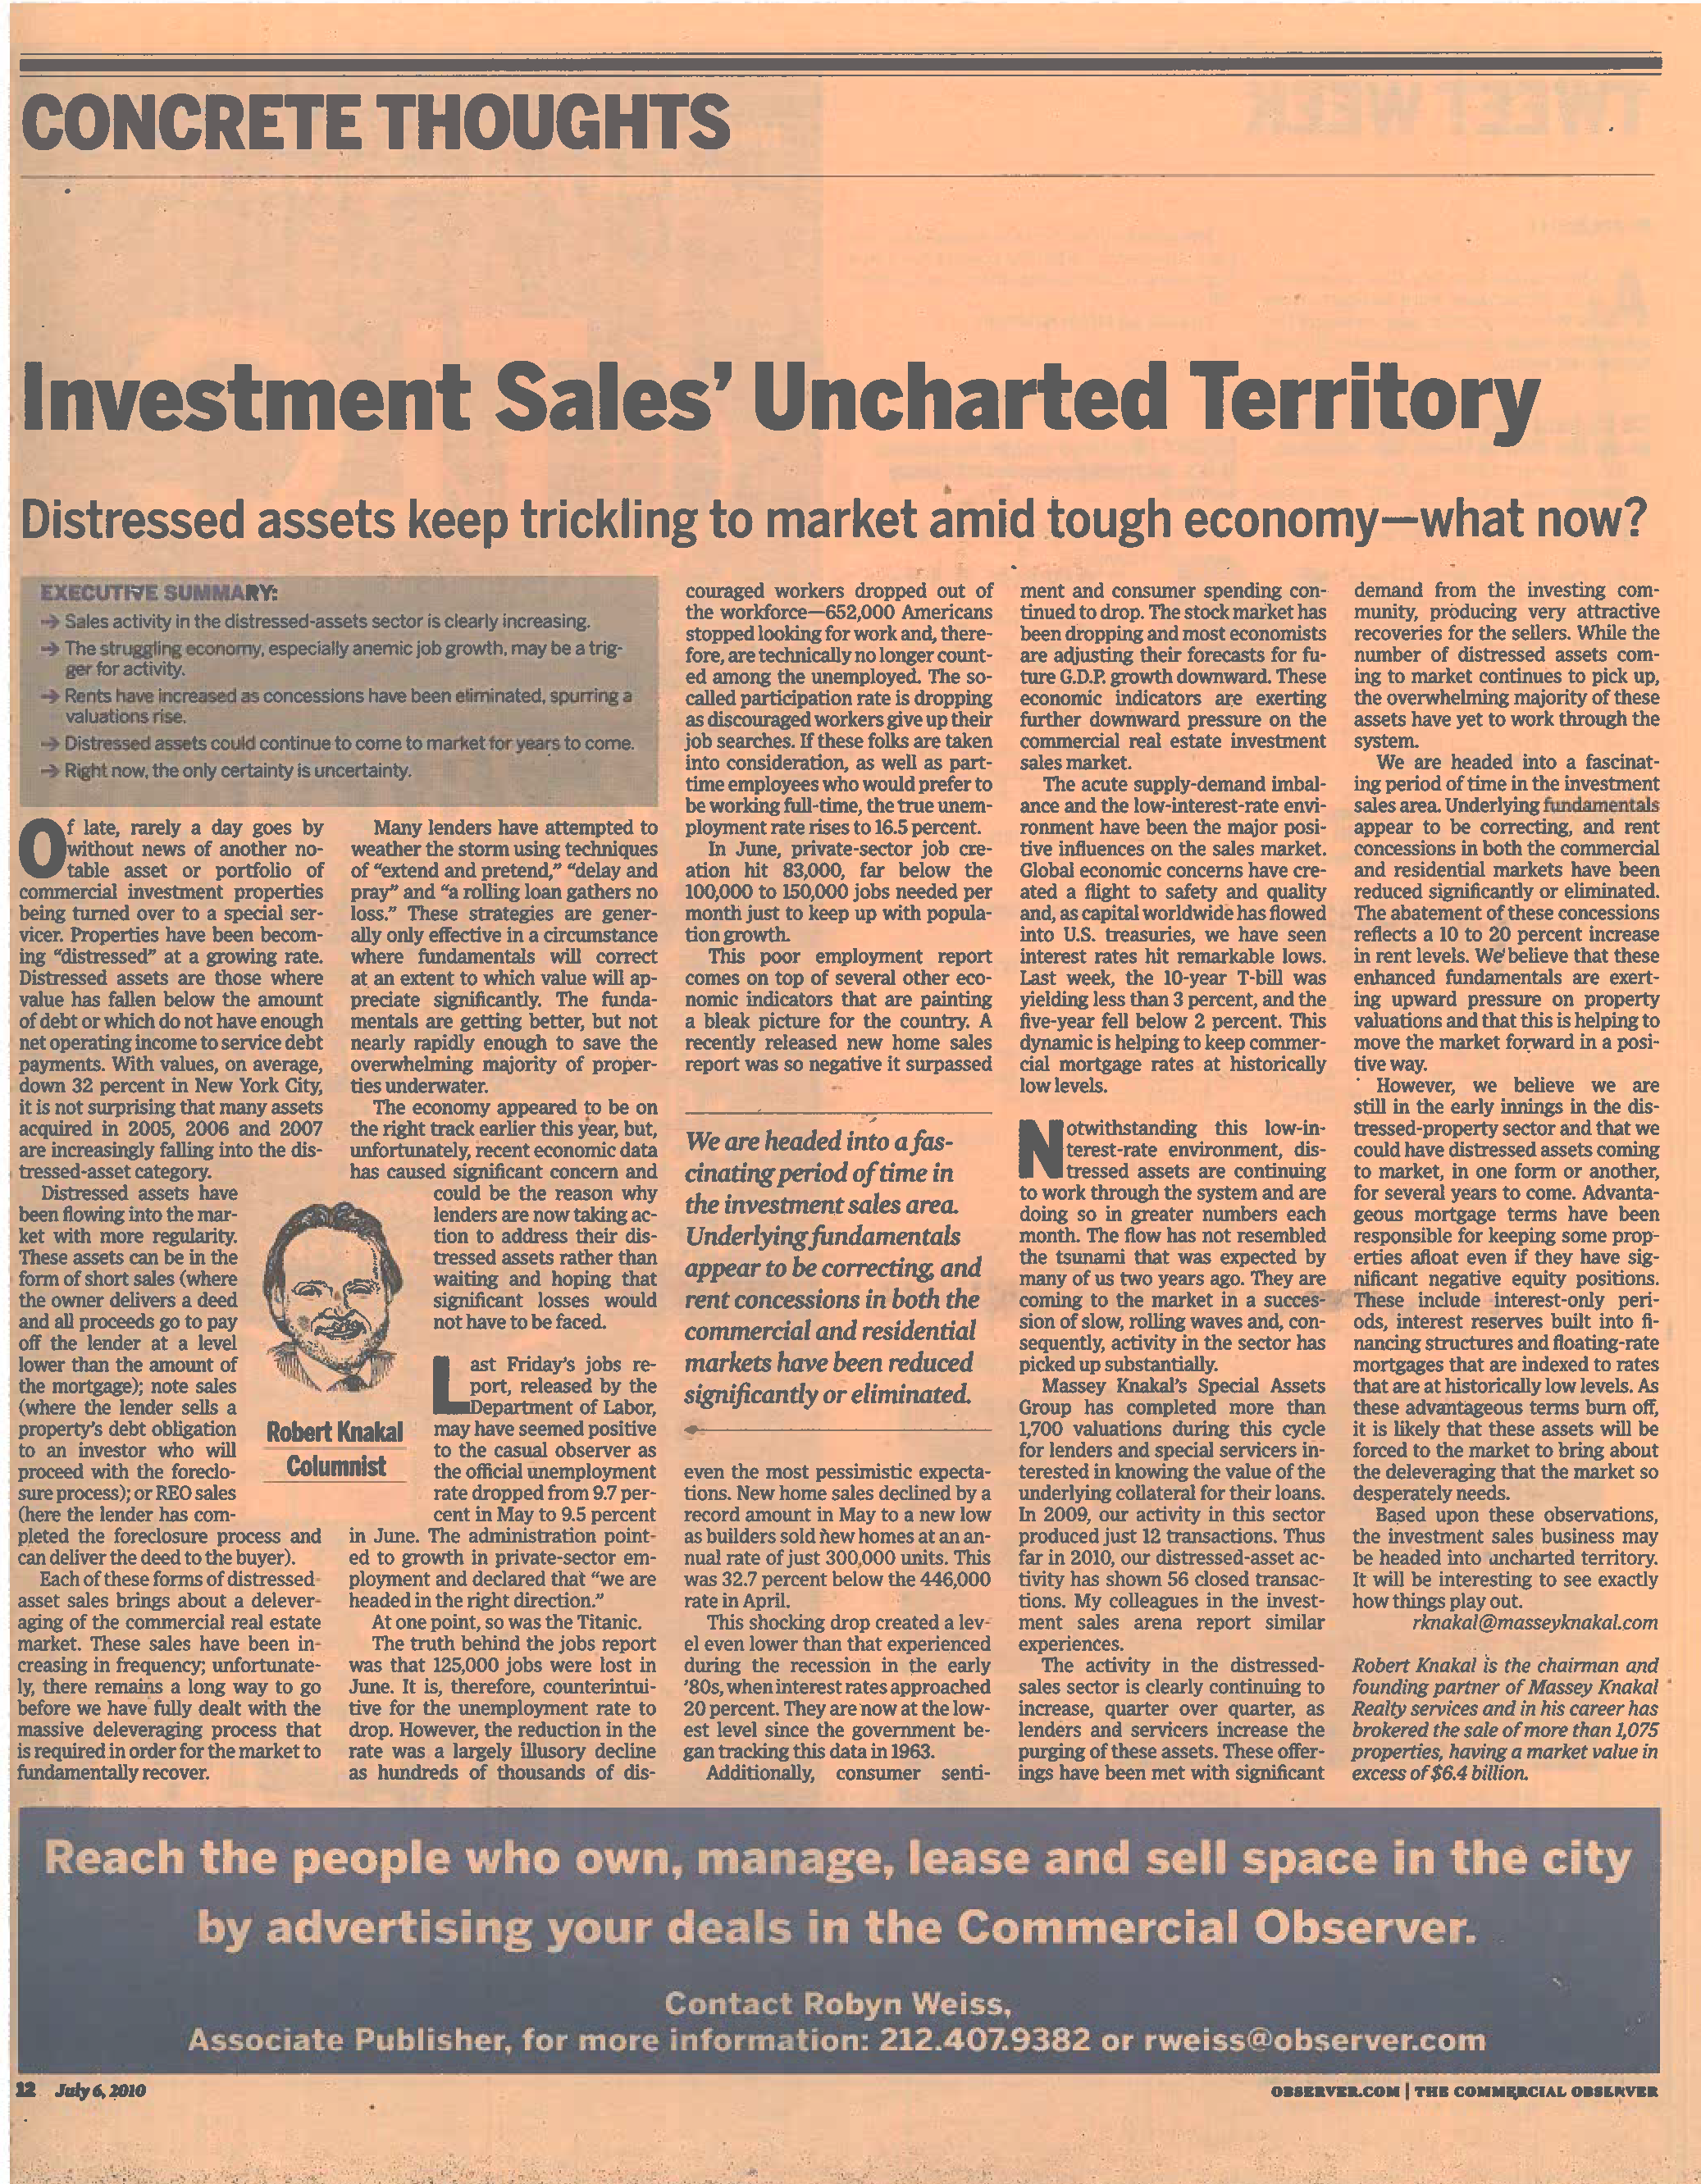 Concrete Thoughts - Investment Sales_ Uncharted Territory - July 6 2010